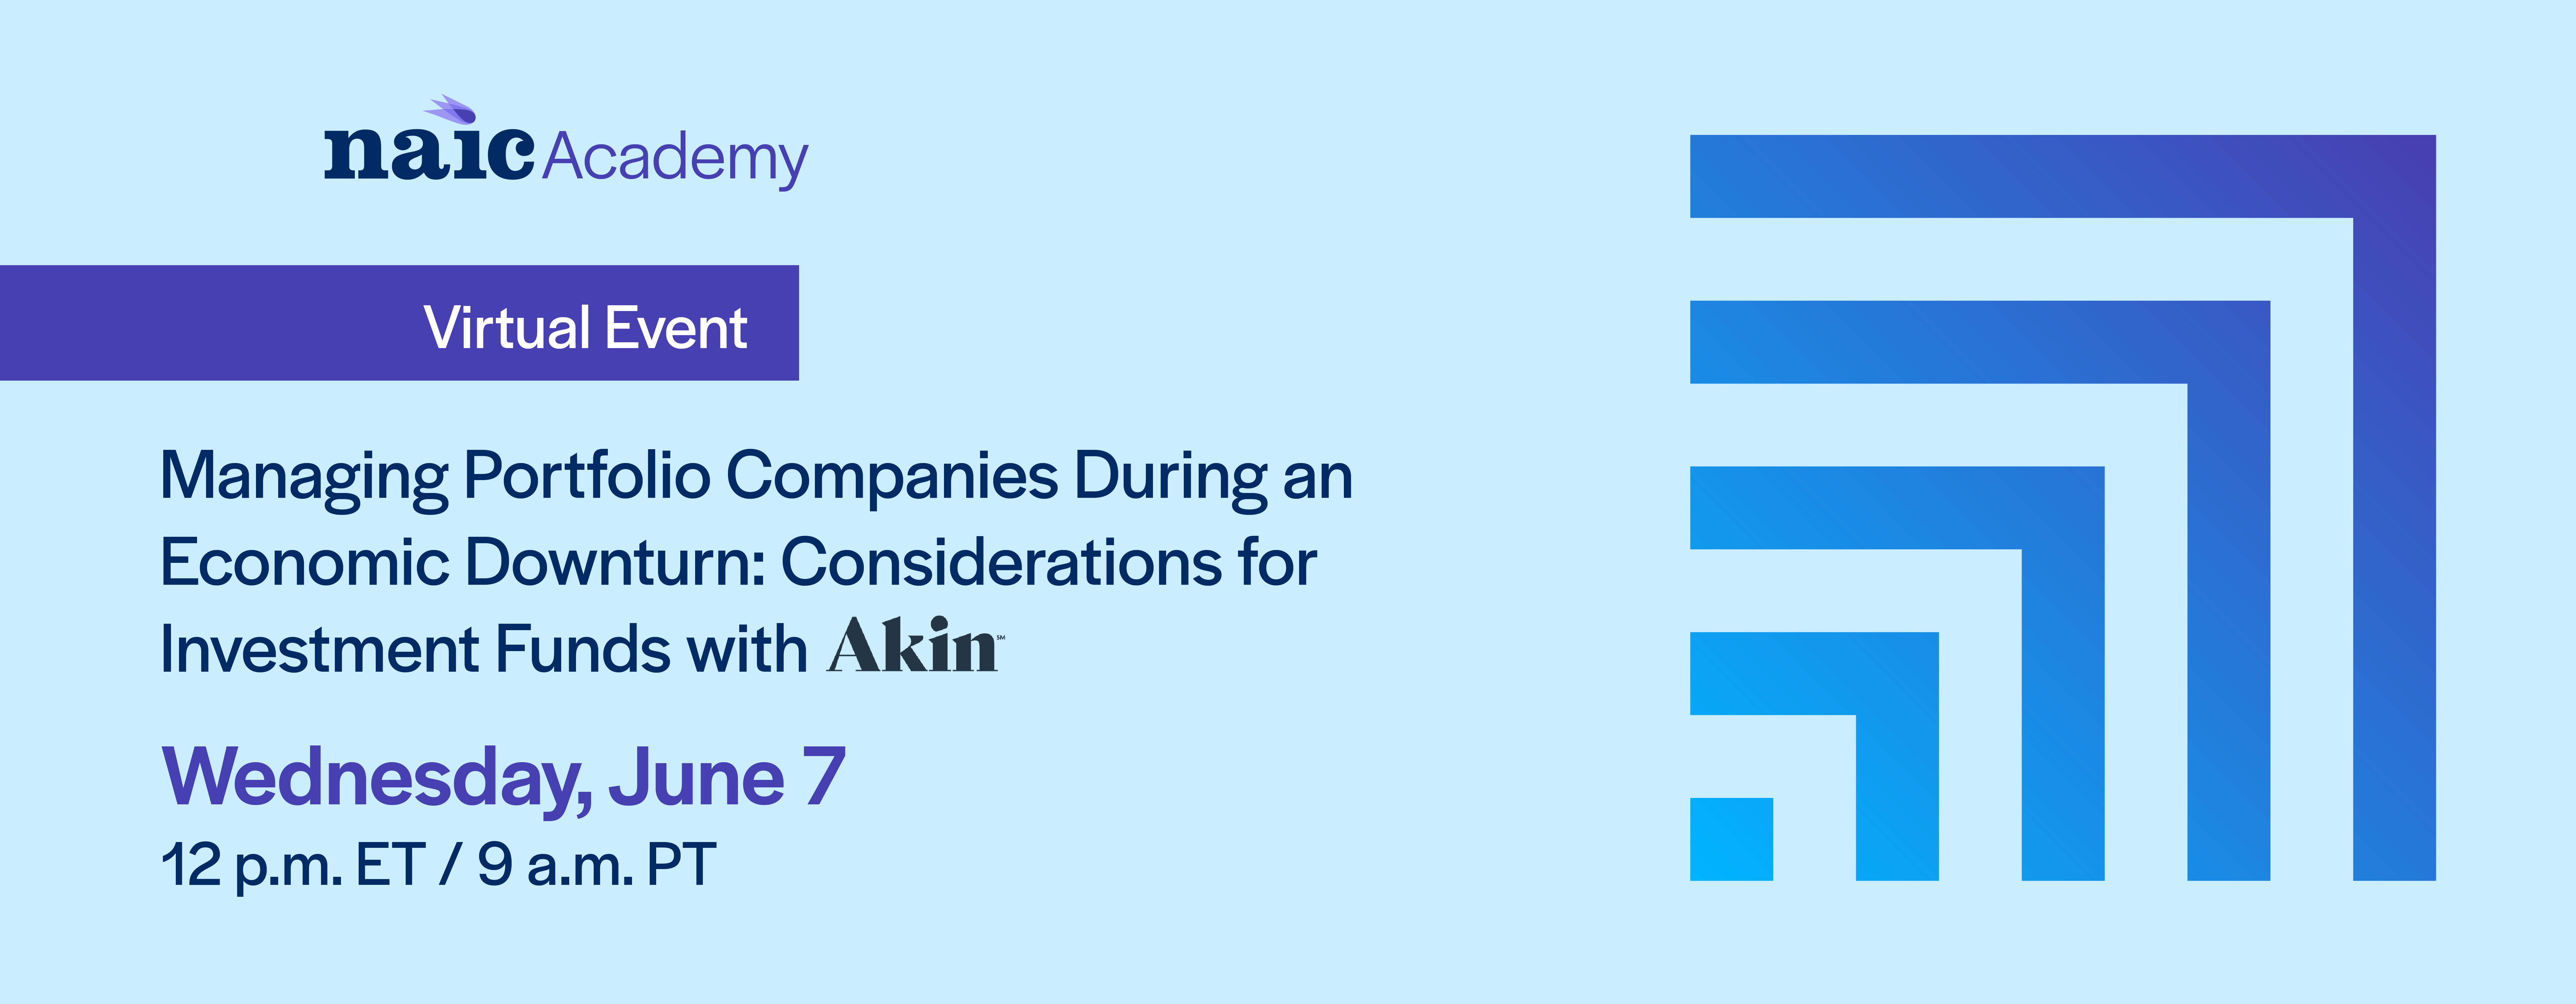 Promotional Graphic for Managing Portfolio Companies During an Economic Downturn: Considerations for Investment Funds with Akin